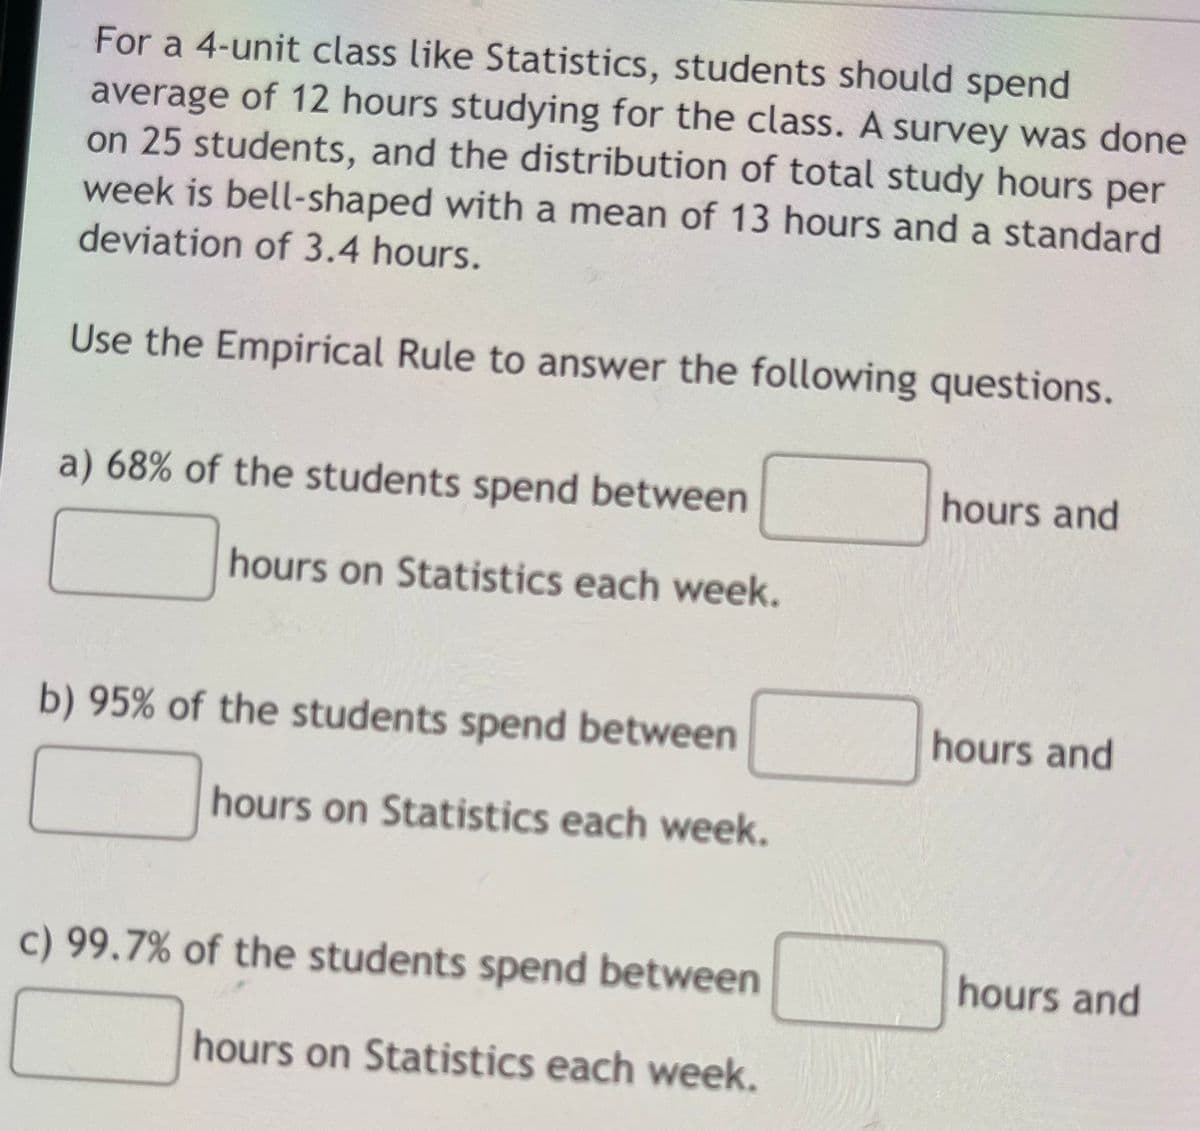 For a 4-unit class like Statistics, students should spend
average of 12 hours studying for the class. A survey was done
on 25 students, and the distribution of total study hours per
week is bell-shaped with a mean of 13 hours and a standard
deviation of 3.4 hours.
Use the Empirical Rule to answer the following questions.
a) 68% of the students spend between
hours and
hours on Statistics each week.
b) 95% of the students spend between
hours and
hours on Statistics each week.
c) 99.7% of the students spend between
hours and
hours on Statistics each week.
